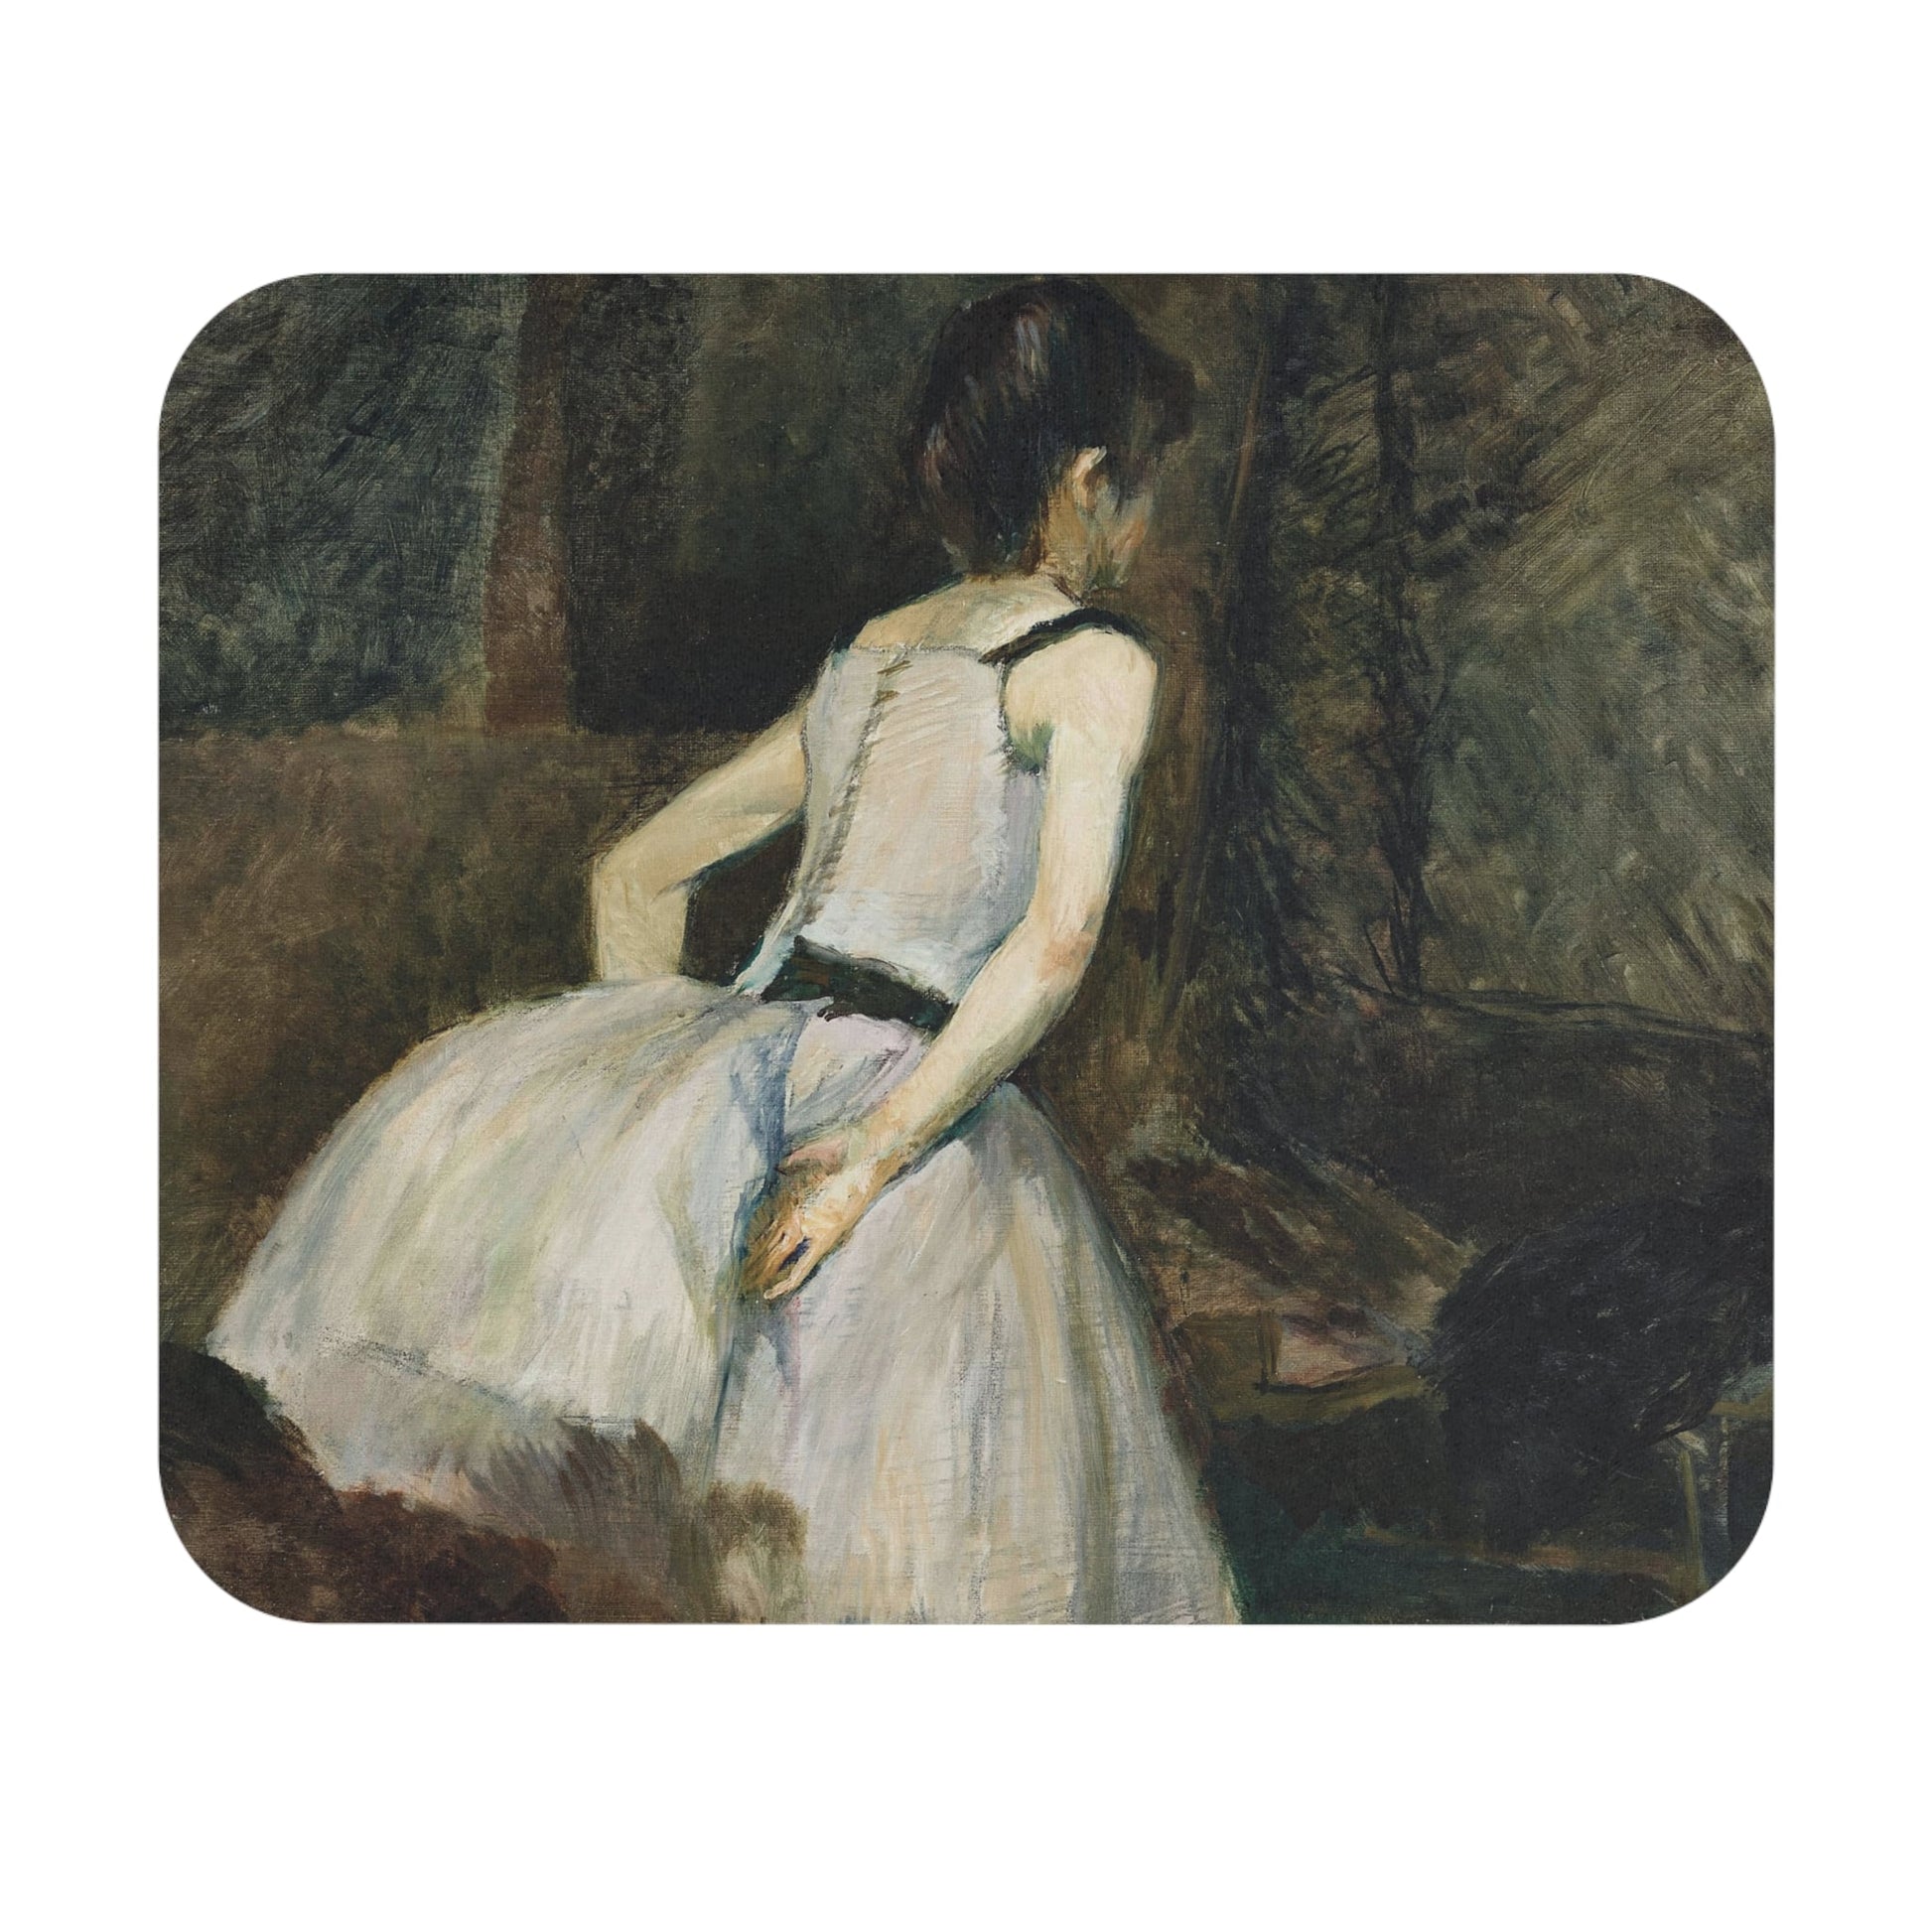 Moody Ballerina Mouse Pad with a black and white aesthetic, perfect for desk and office decor.